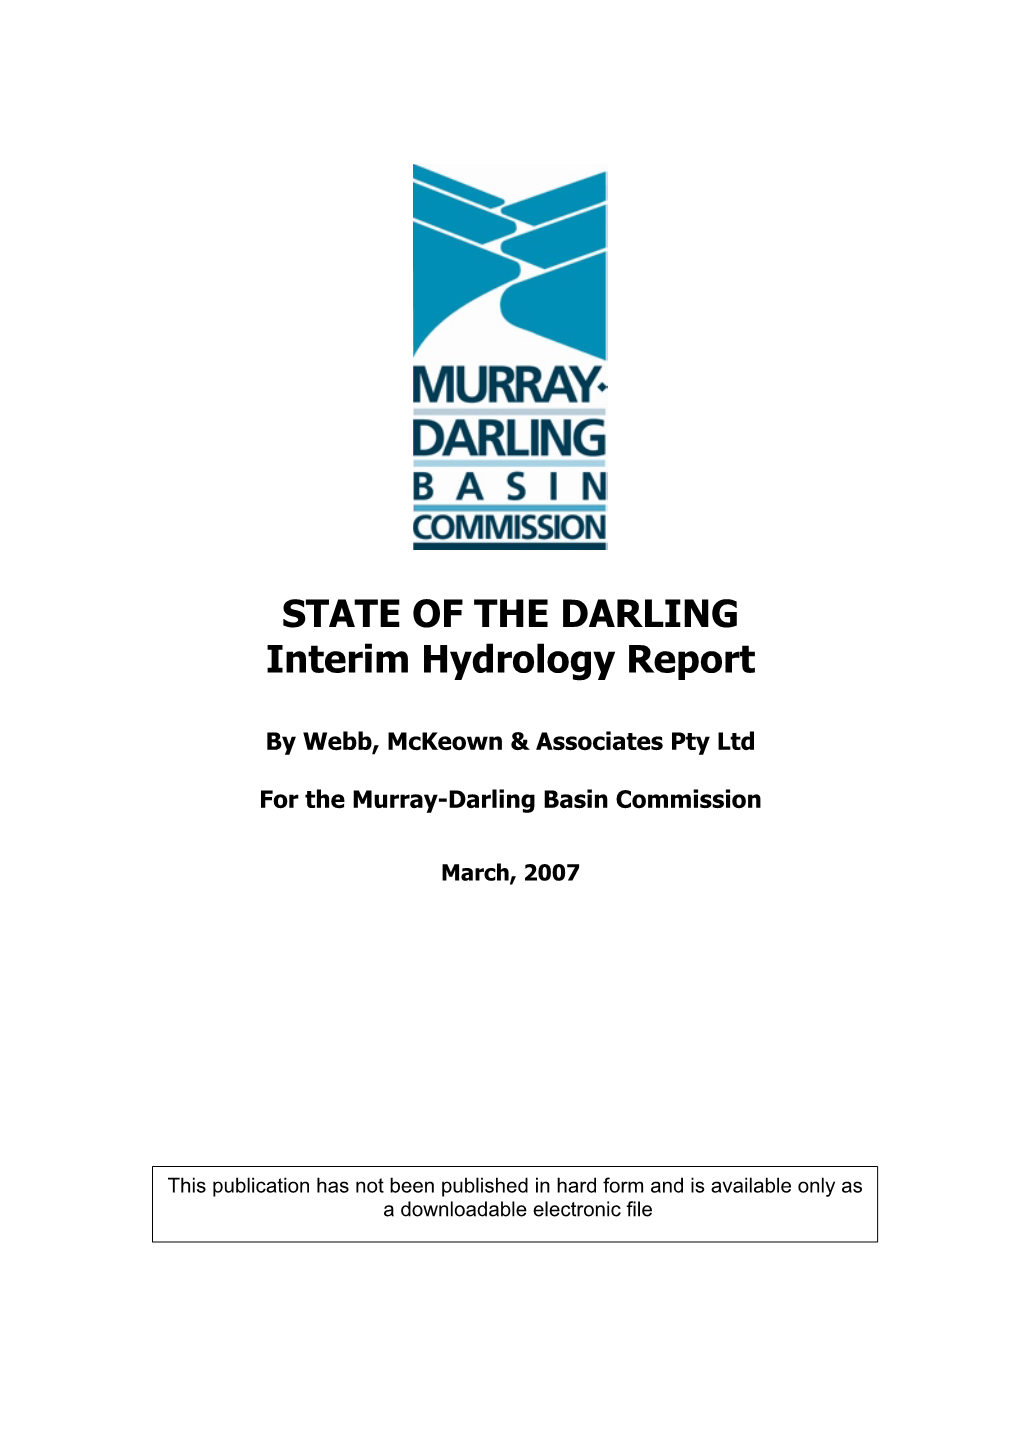 STATE of the DARLING Interim Hydrology Report March 2007